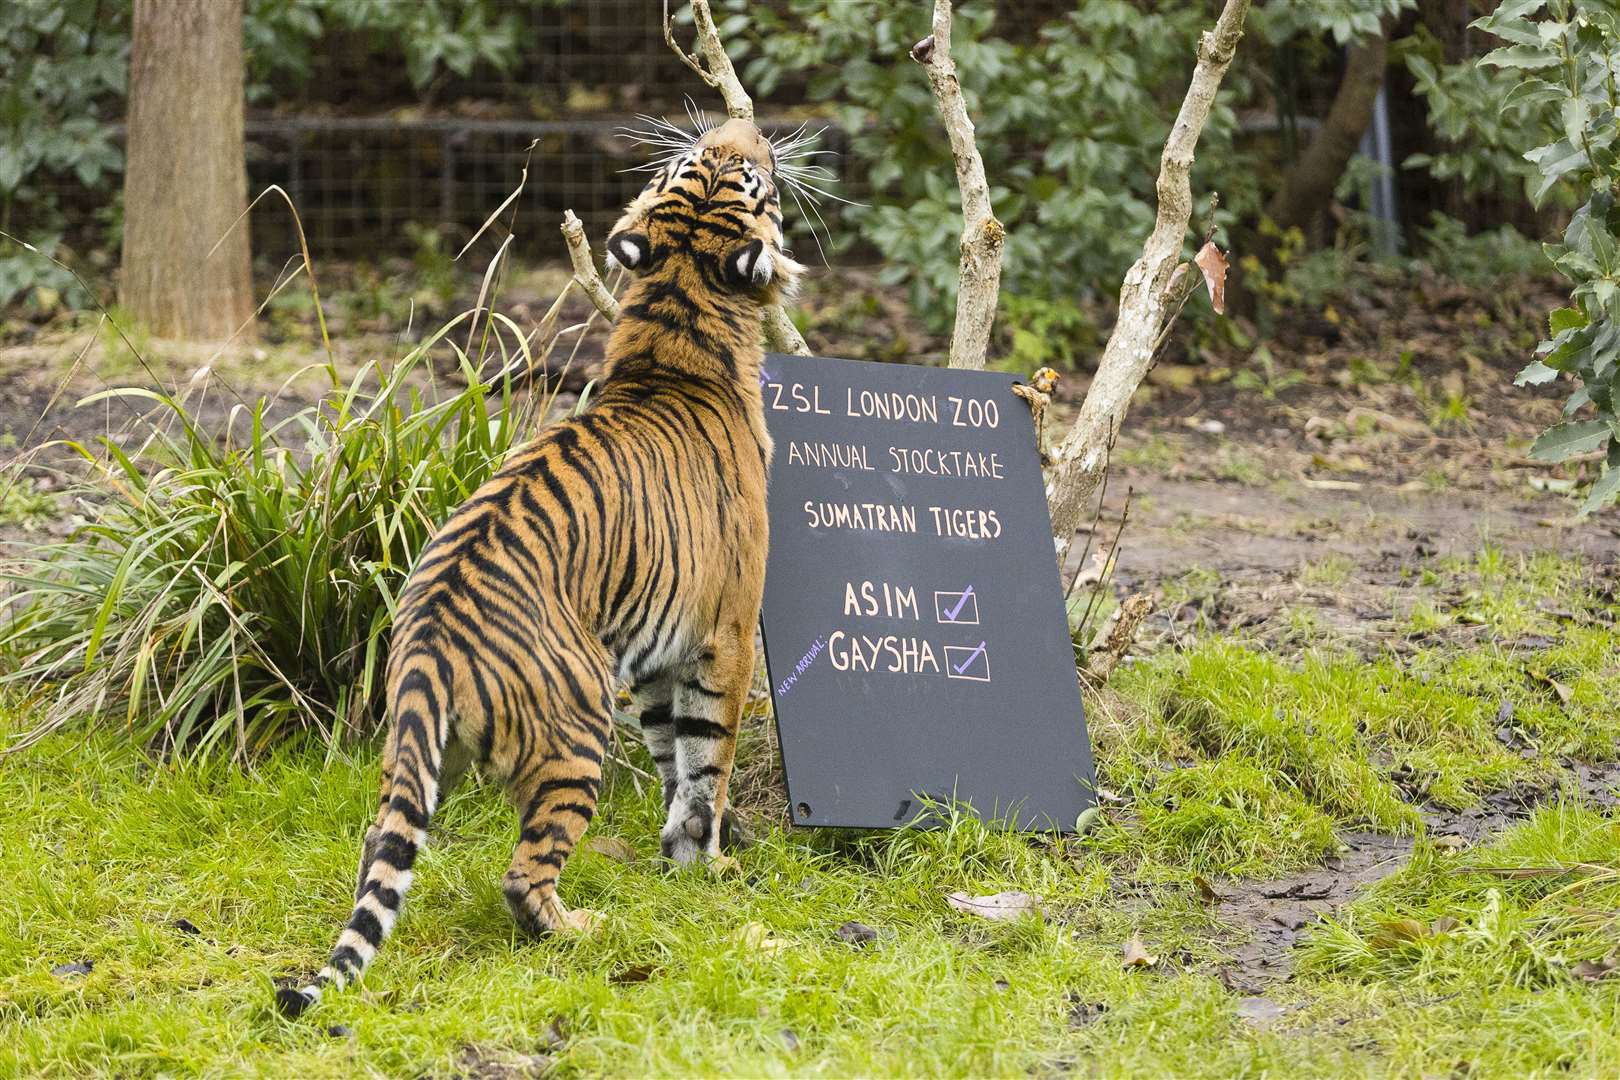 The tigers were present and correct (ZSL London Zoo)